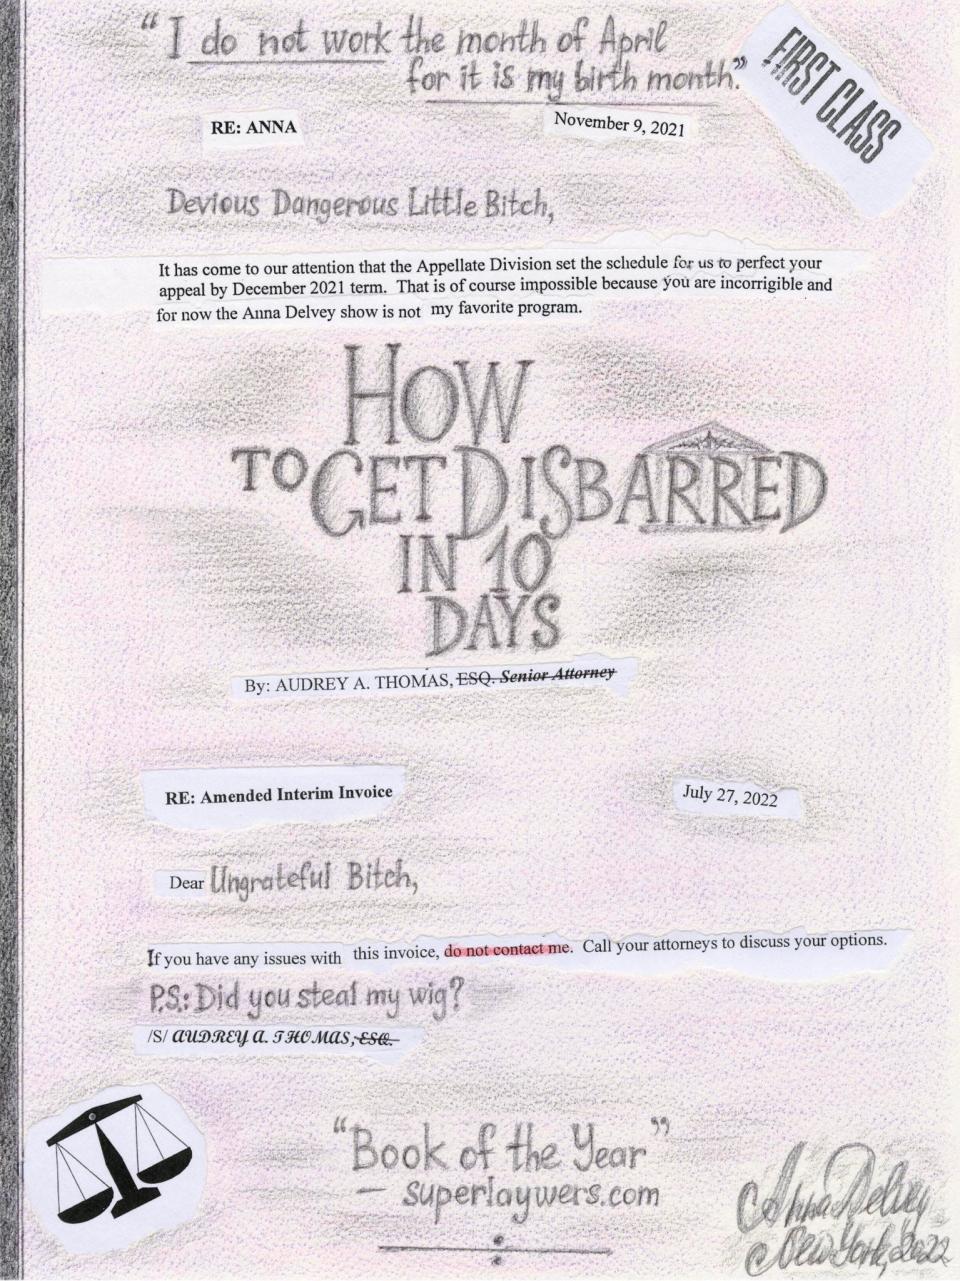 anna sorokin delvey artwork how to get disbarred in 10 days audrey thomas